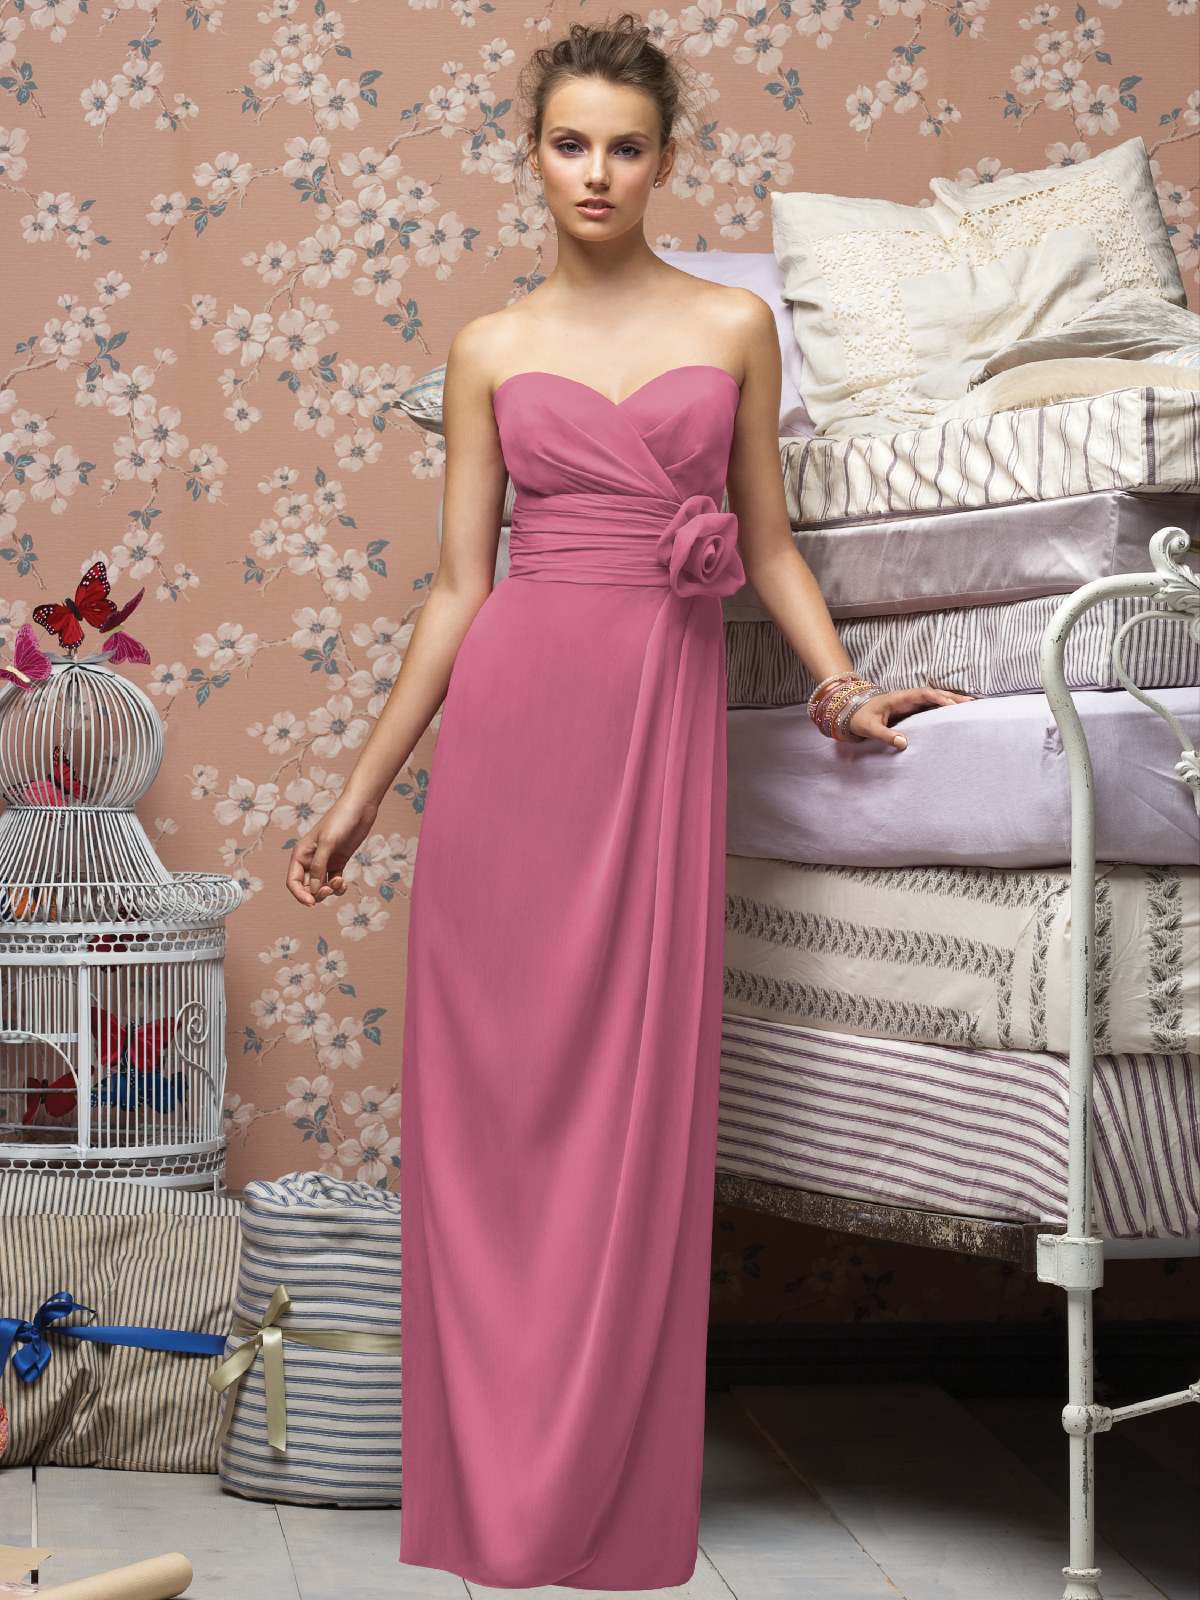 Pink Column Strapless Sweetheart Zipper Floor Length Satin Prom Dresses With Drapes And Flowers 